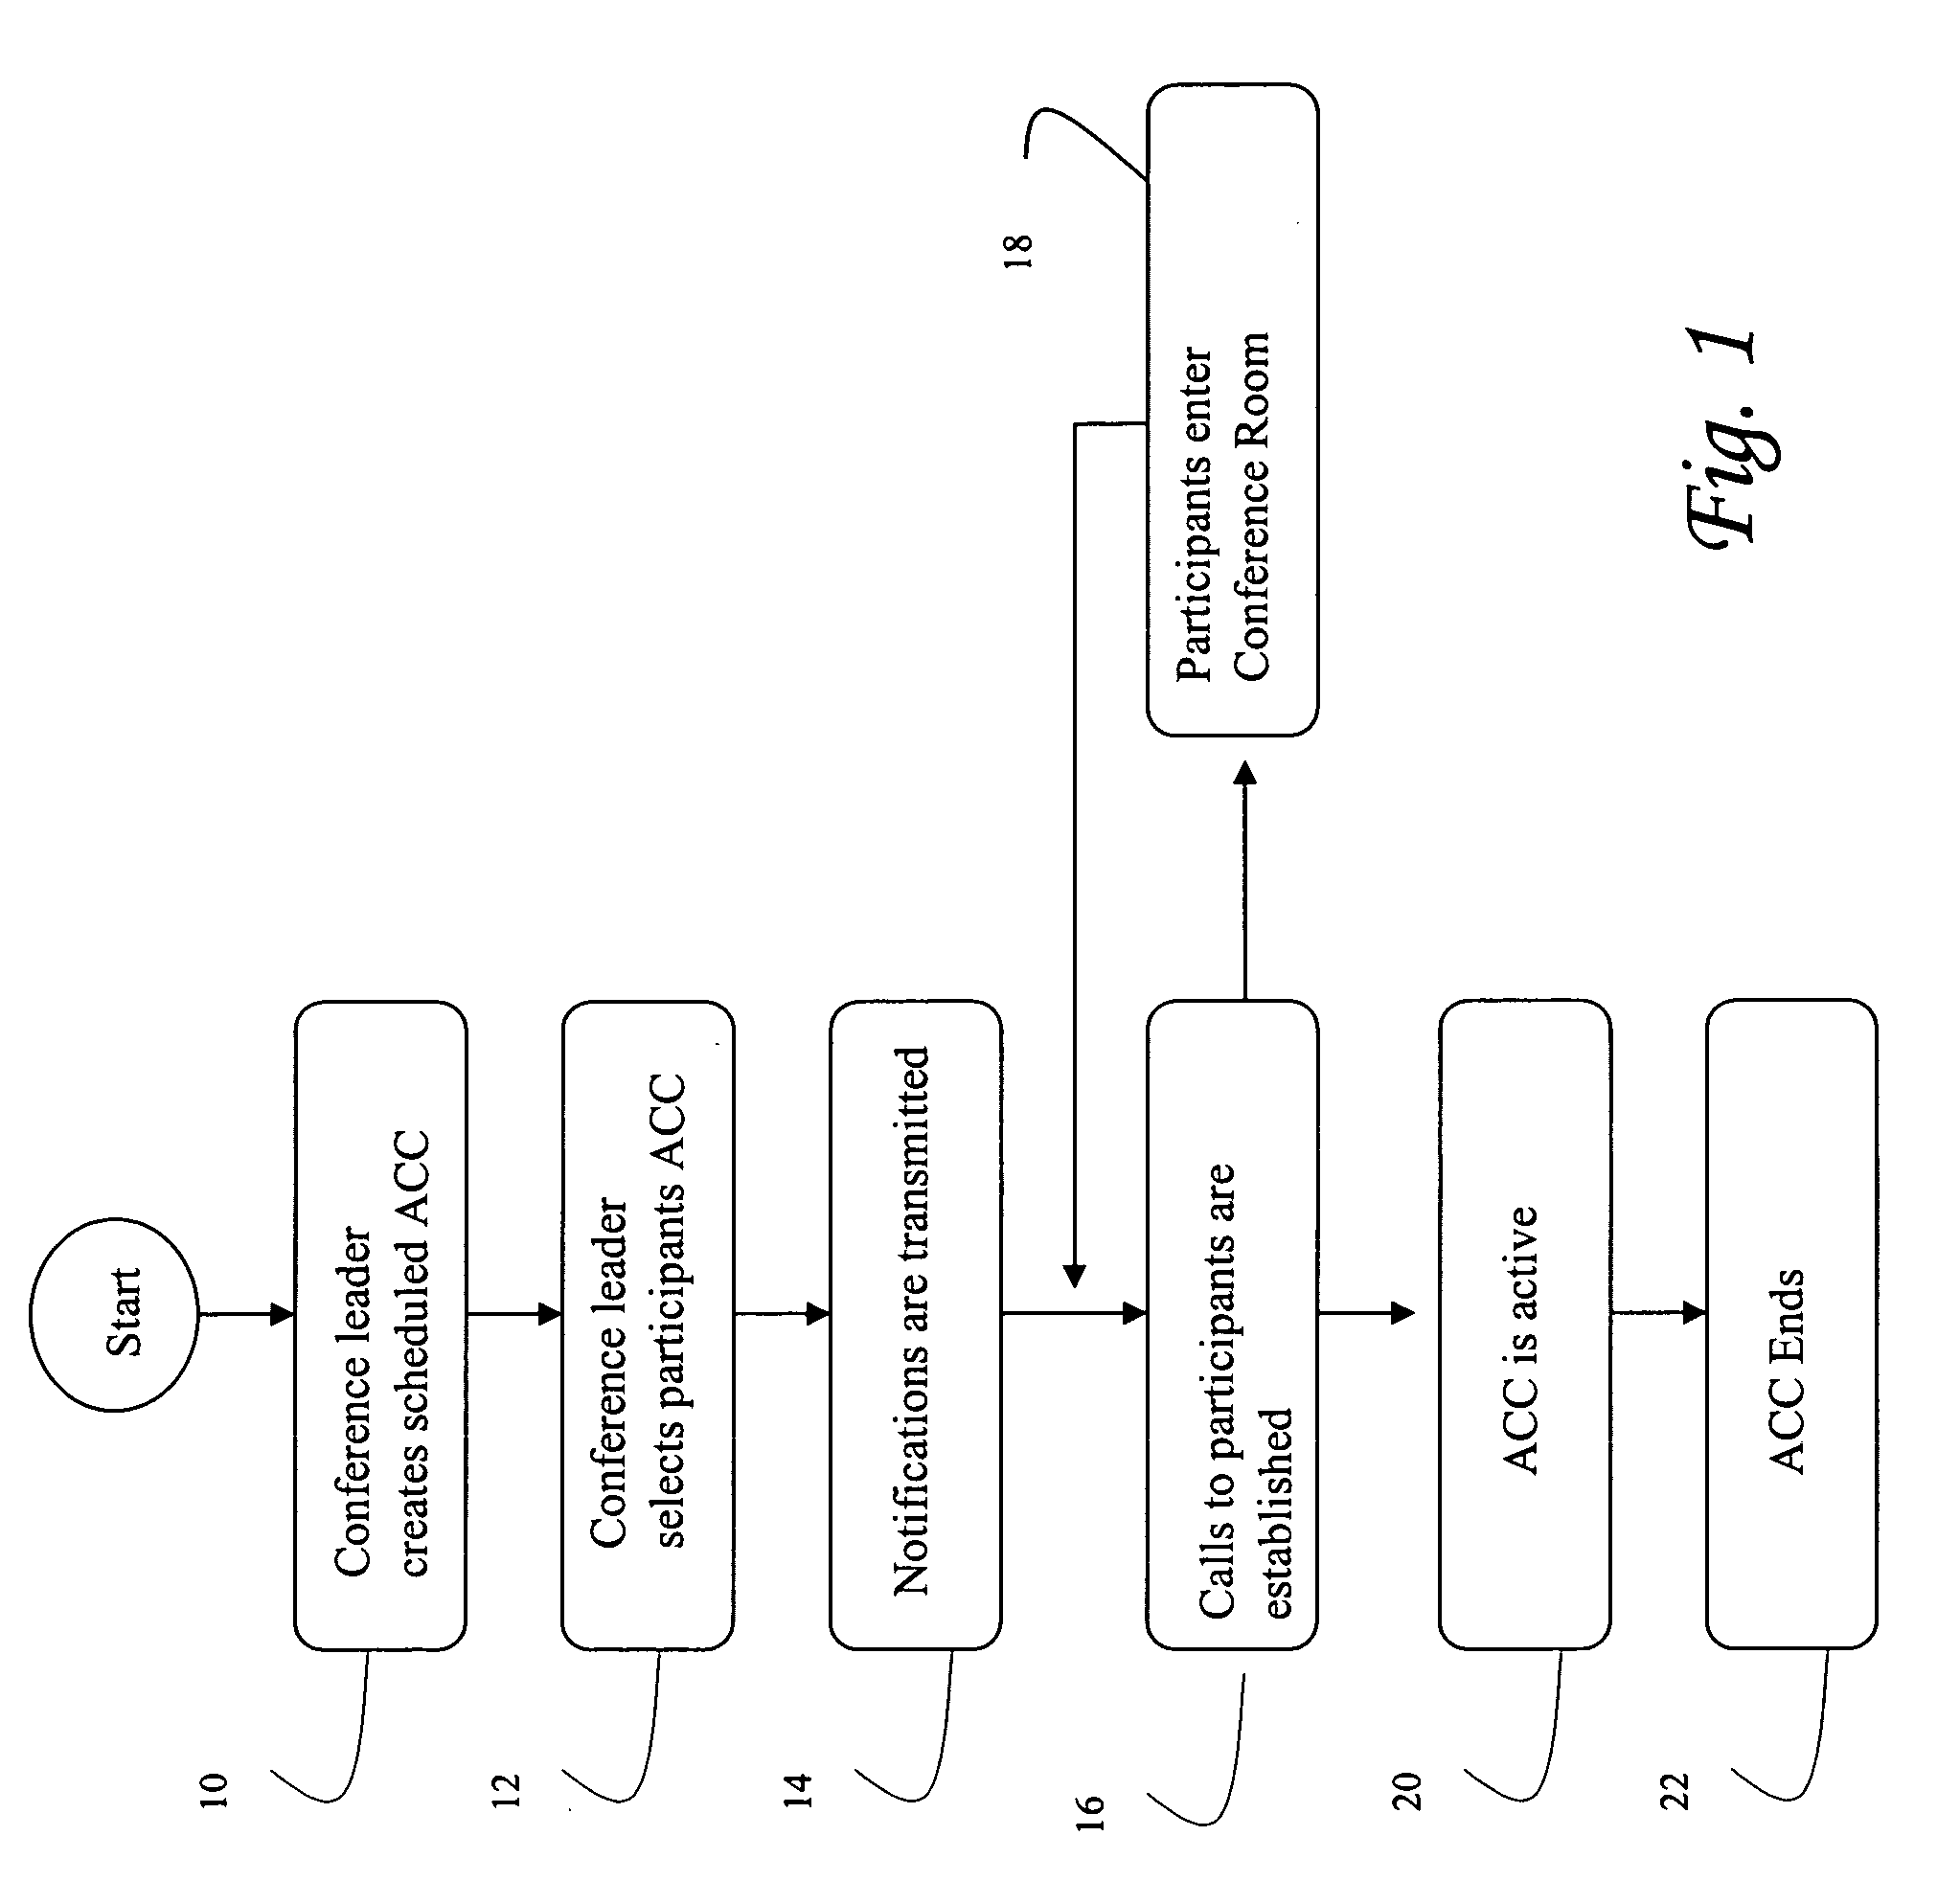 Systems and methods for multi-media control of audio conferencing